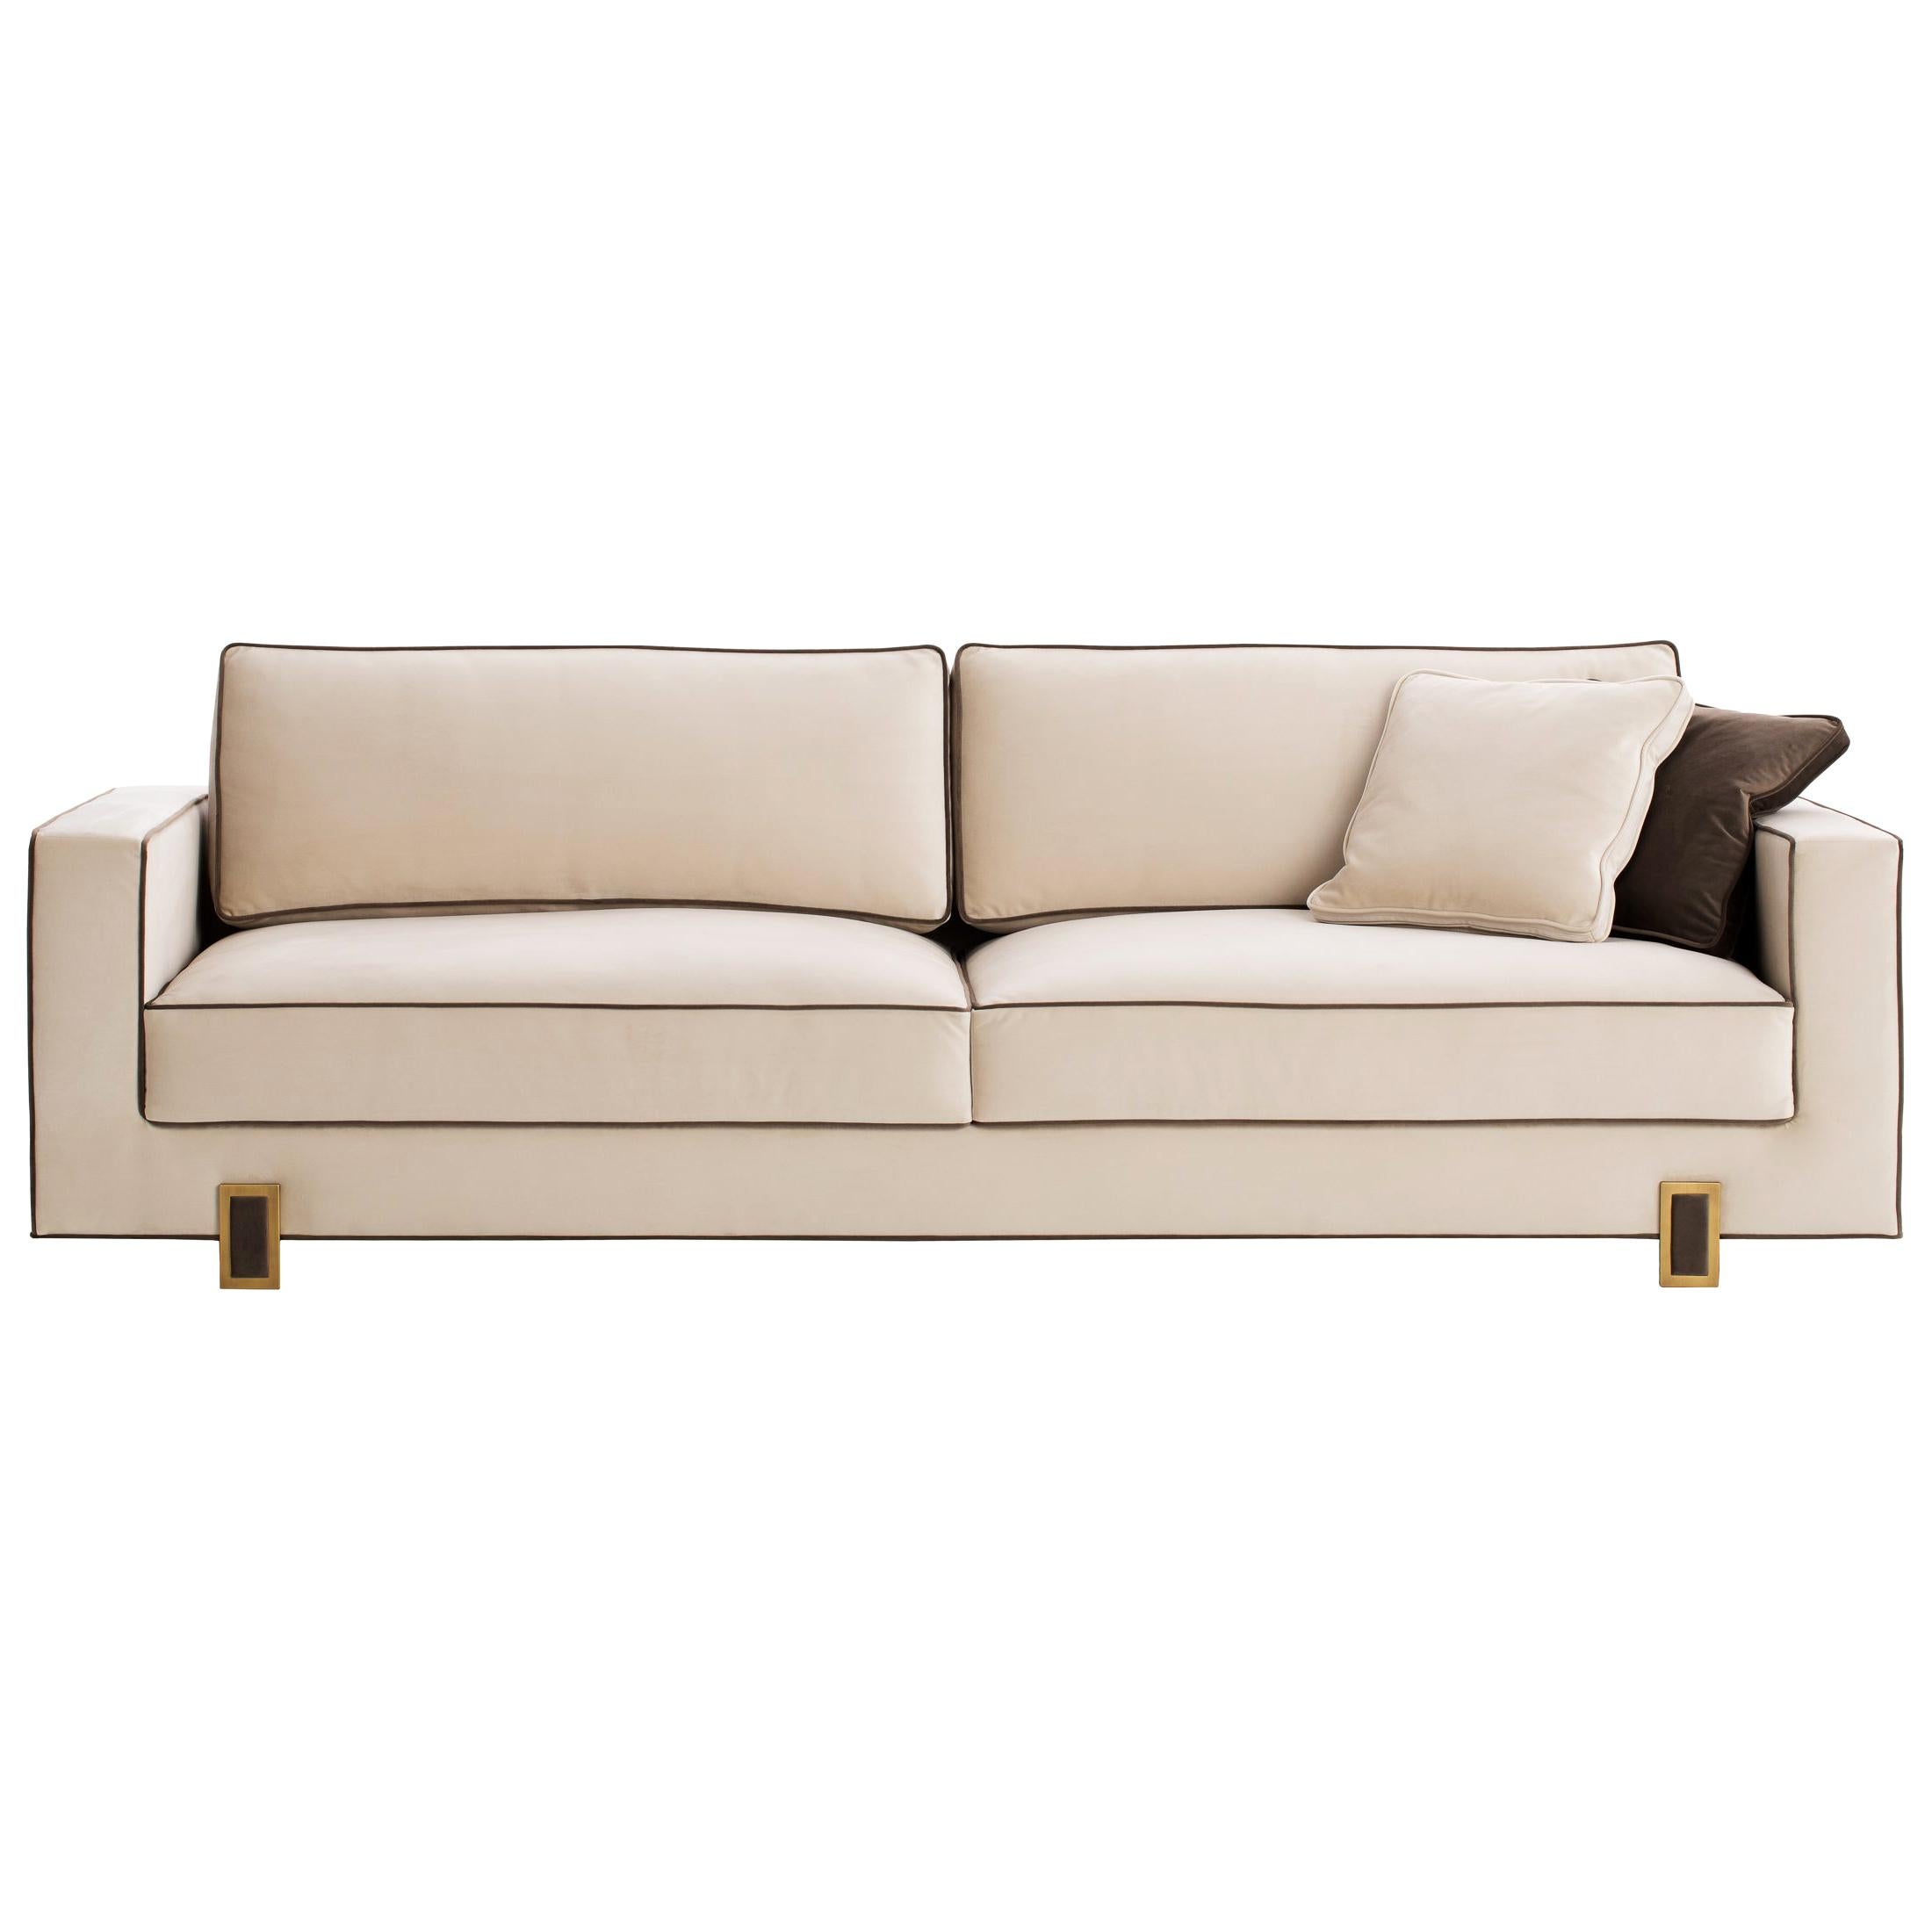 LUSO 3-seater sofa For Sale at 1stDibs | couch with piping, sofa with  piping trim, velvet sofa with contrast piping